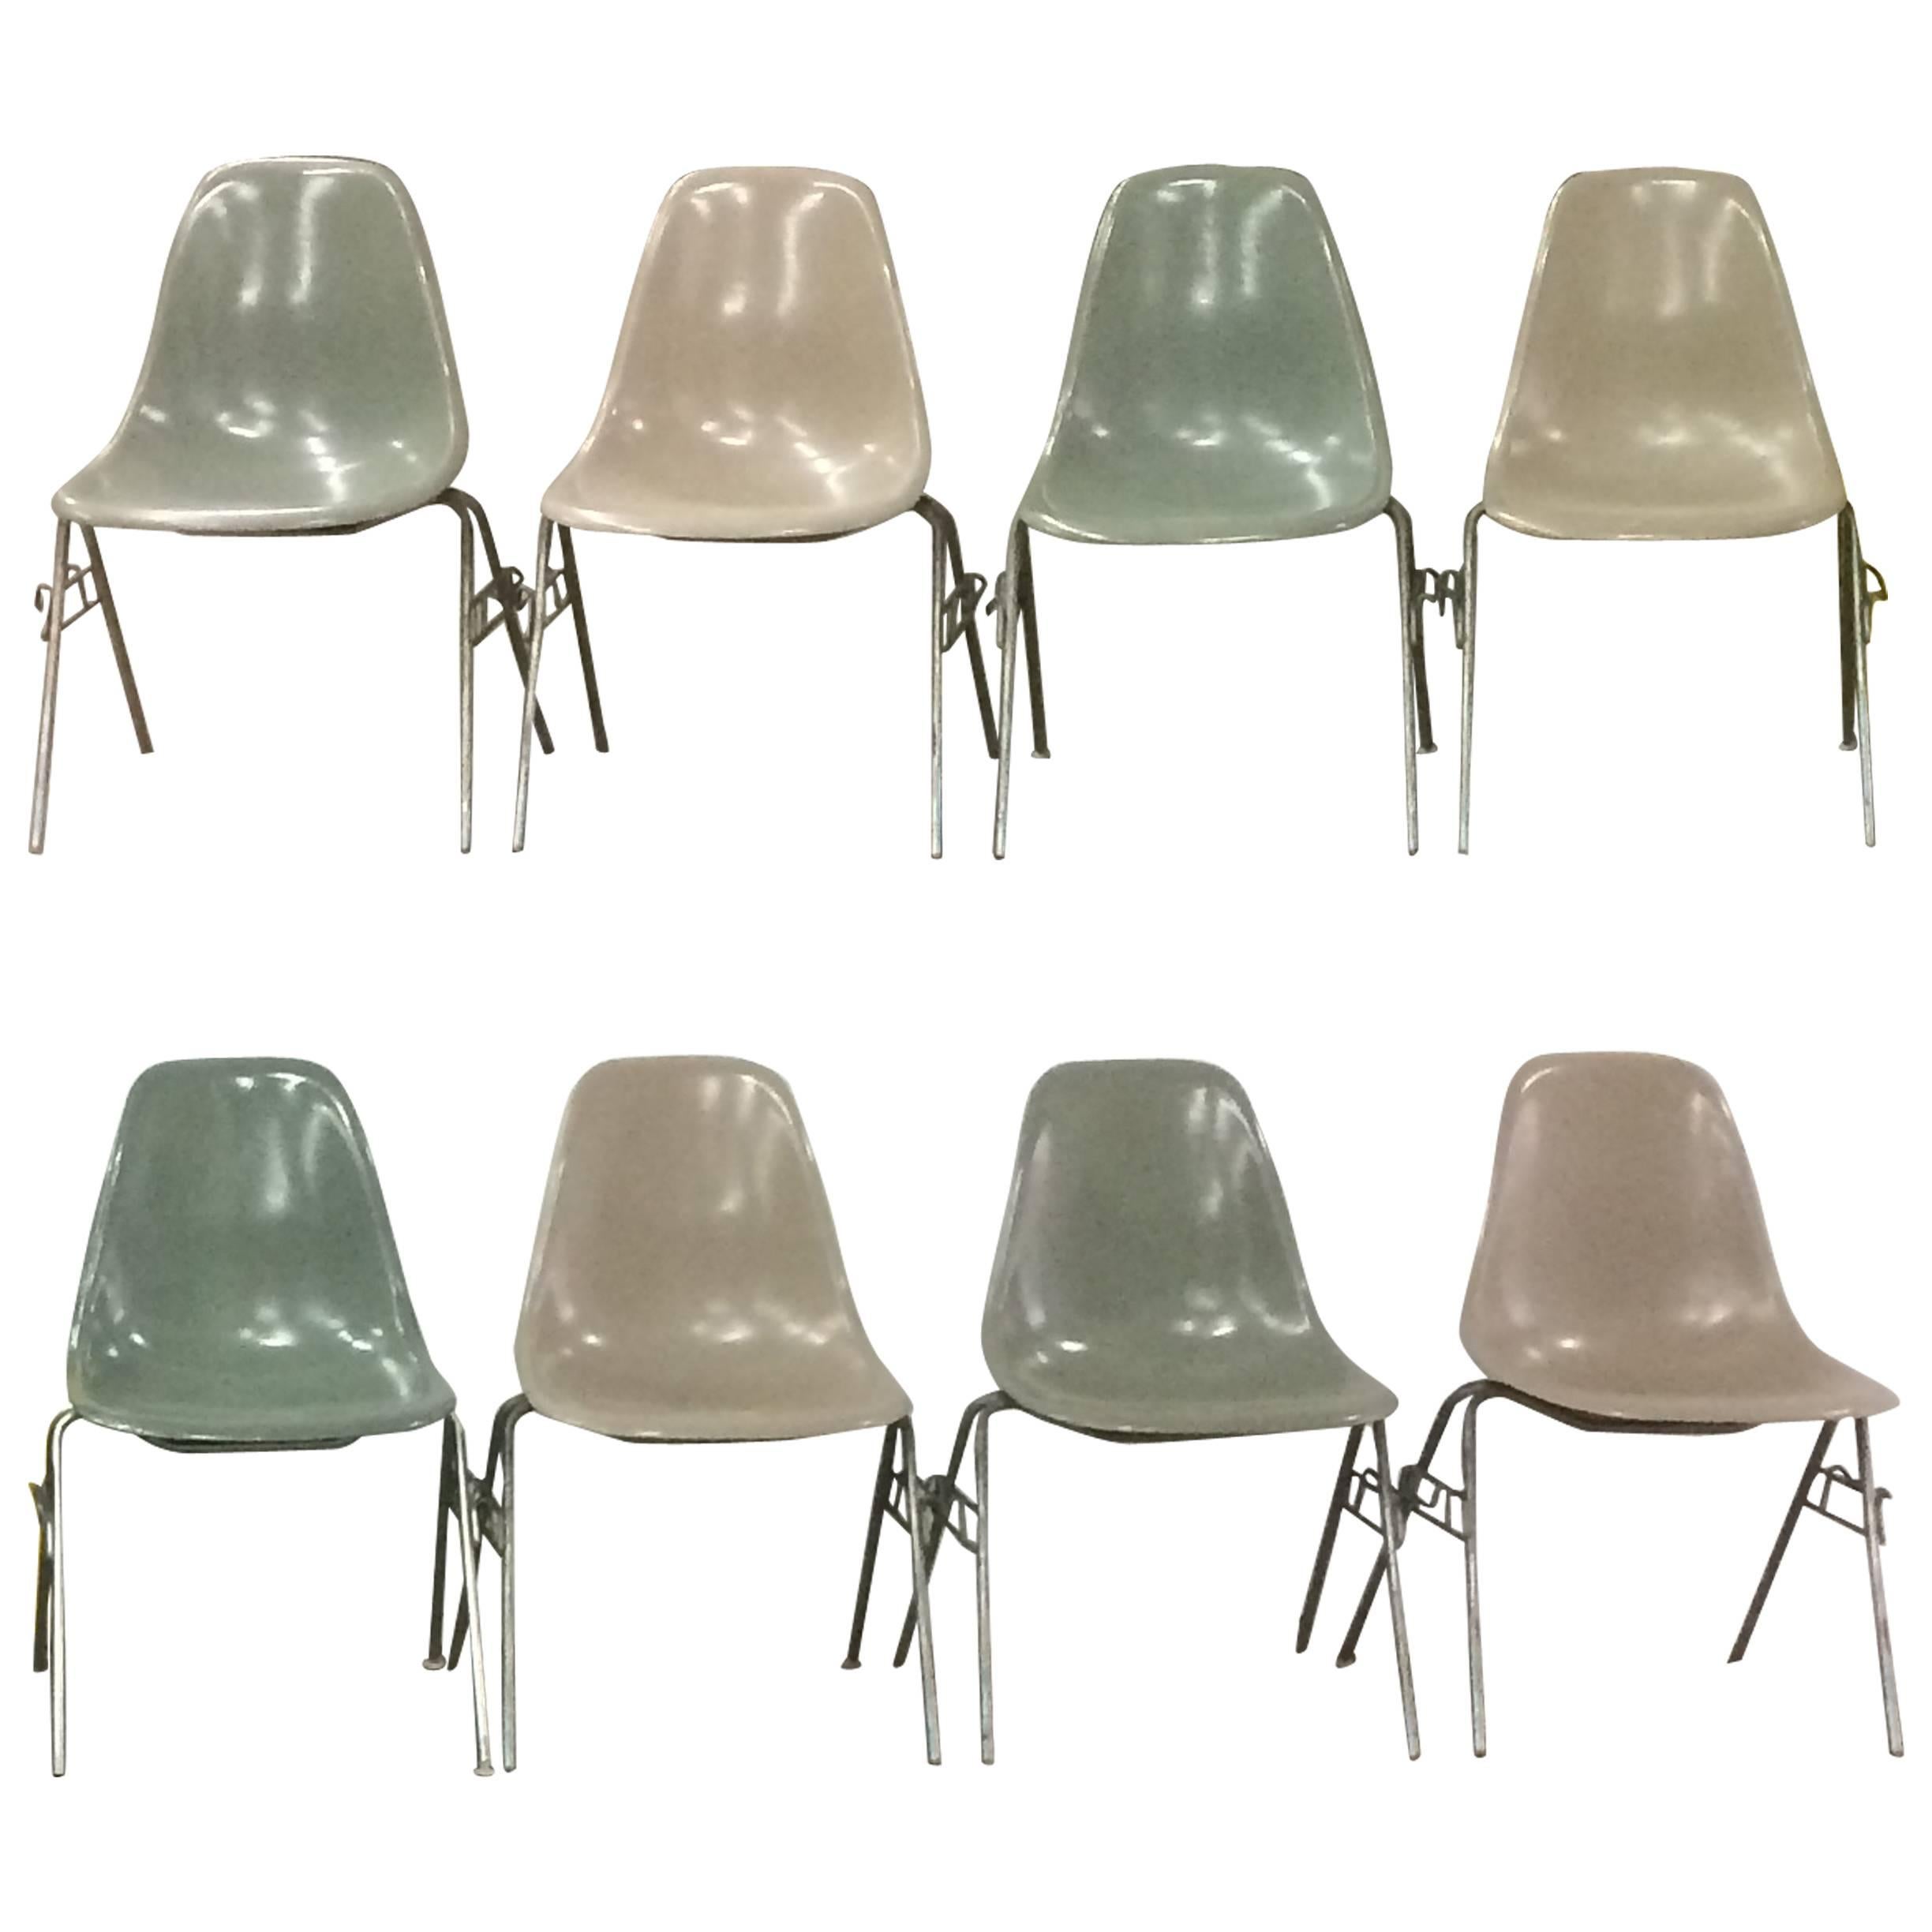 Eight Greige and Seafoam Herman Miller Eames DSS Chairs